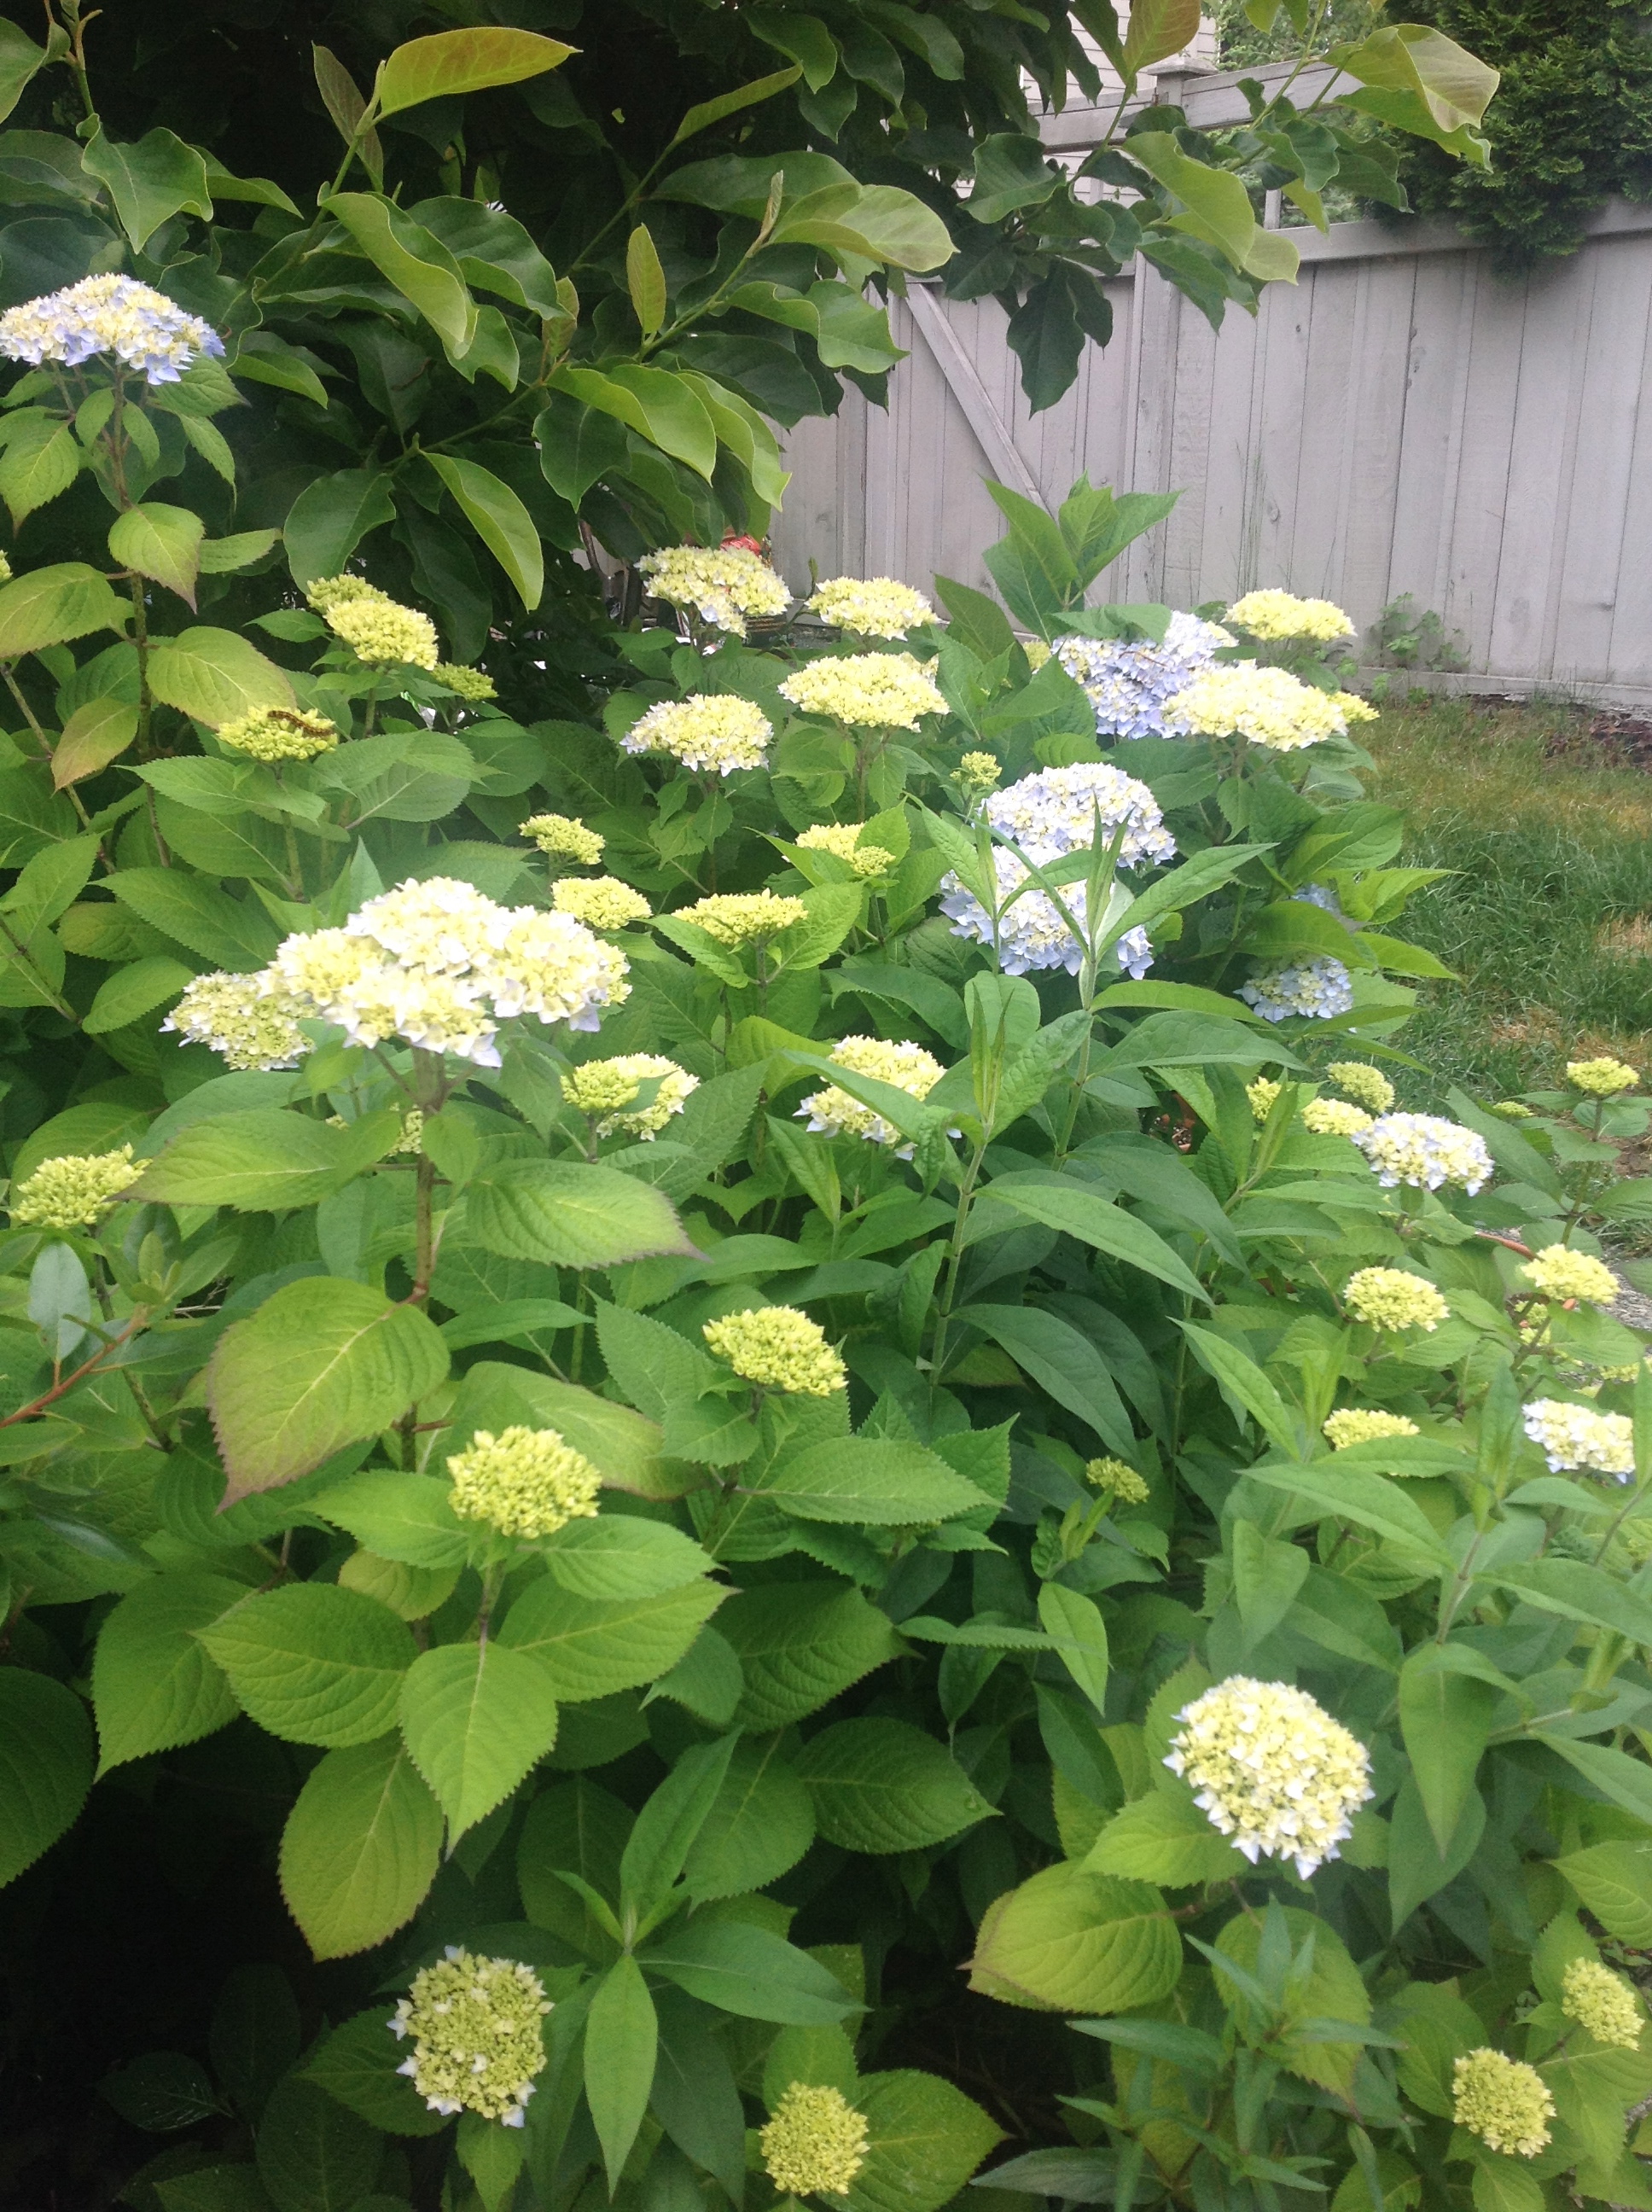 Hydrangeas galore! so looking forward to harvest this pretty flowers in the coming weeks..